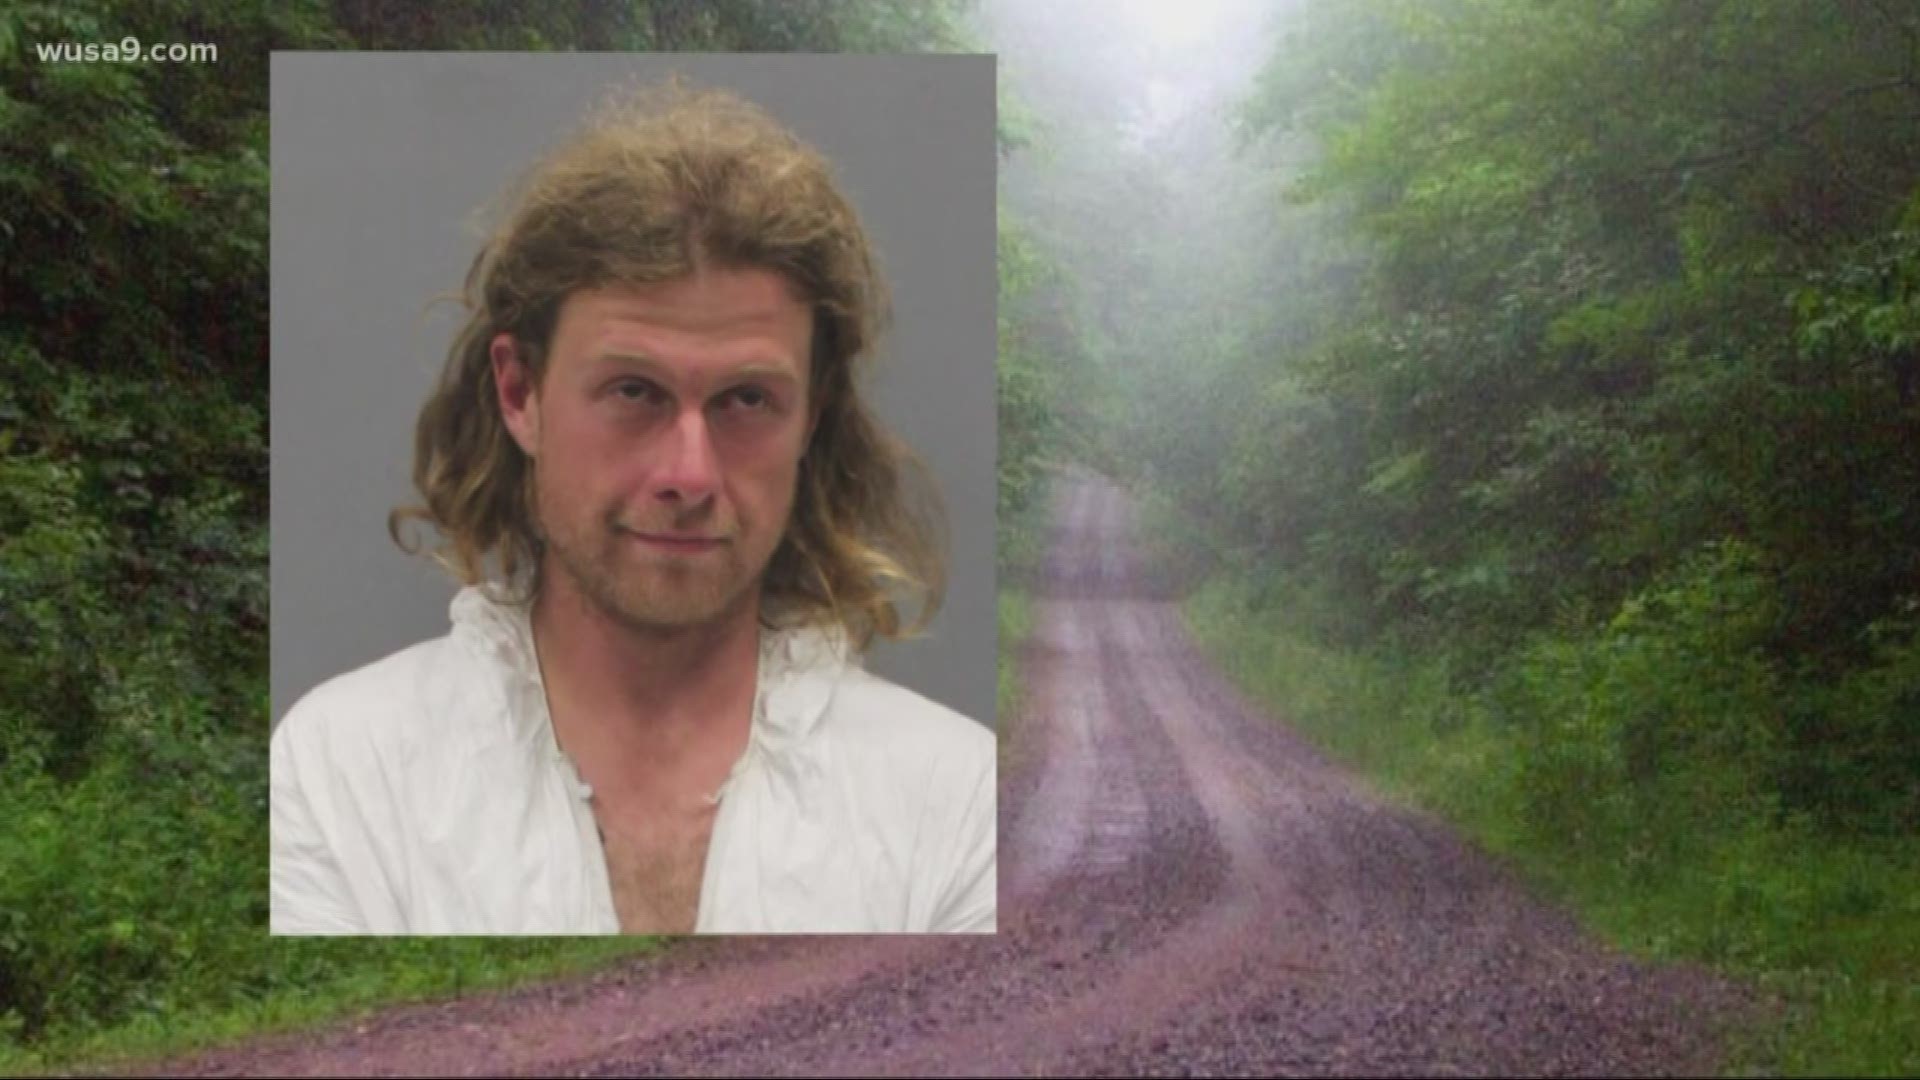 A Massachusetts man is behind bars tonight after police say he used a machete to kill a man and injure a woman on the Appalachian trail. Police say 30-year-old James Louis Jordan attacked a group of hikers Friday.